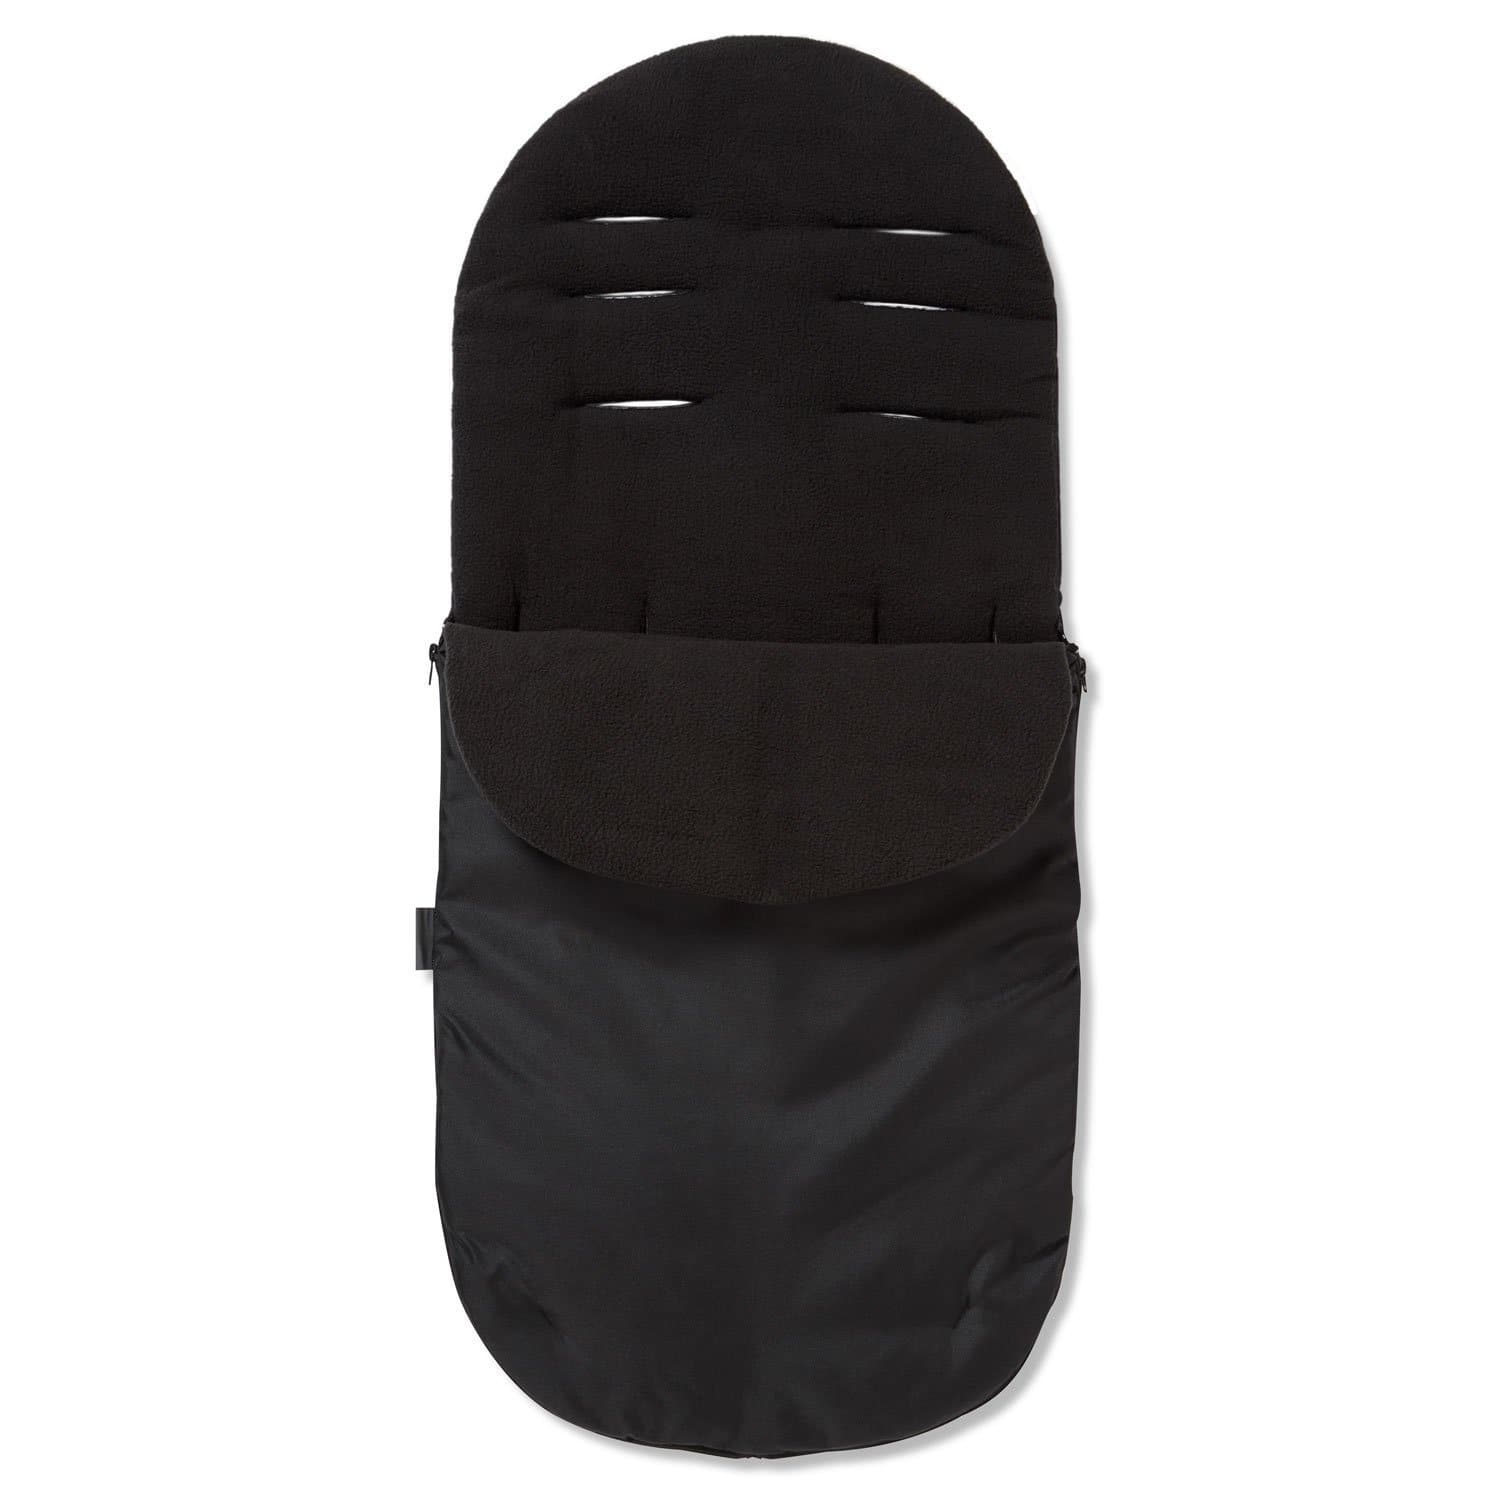 Footmuff / Cosy Toes Compatible with Bugaboo - Black / Fits All Models | For Your Little One